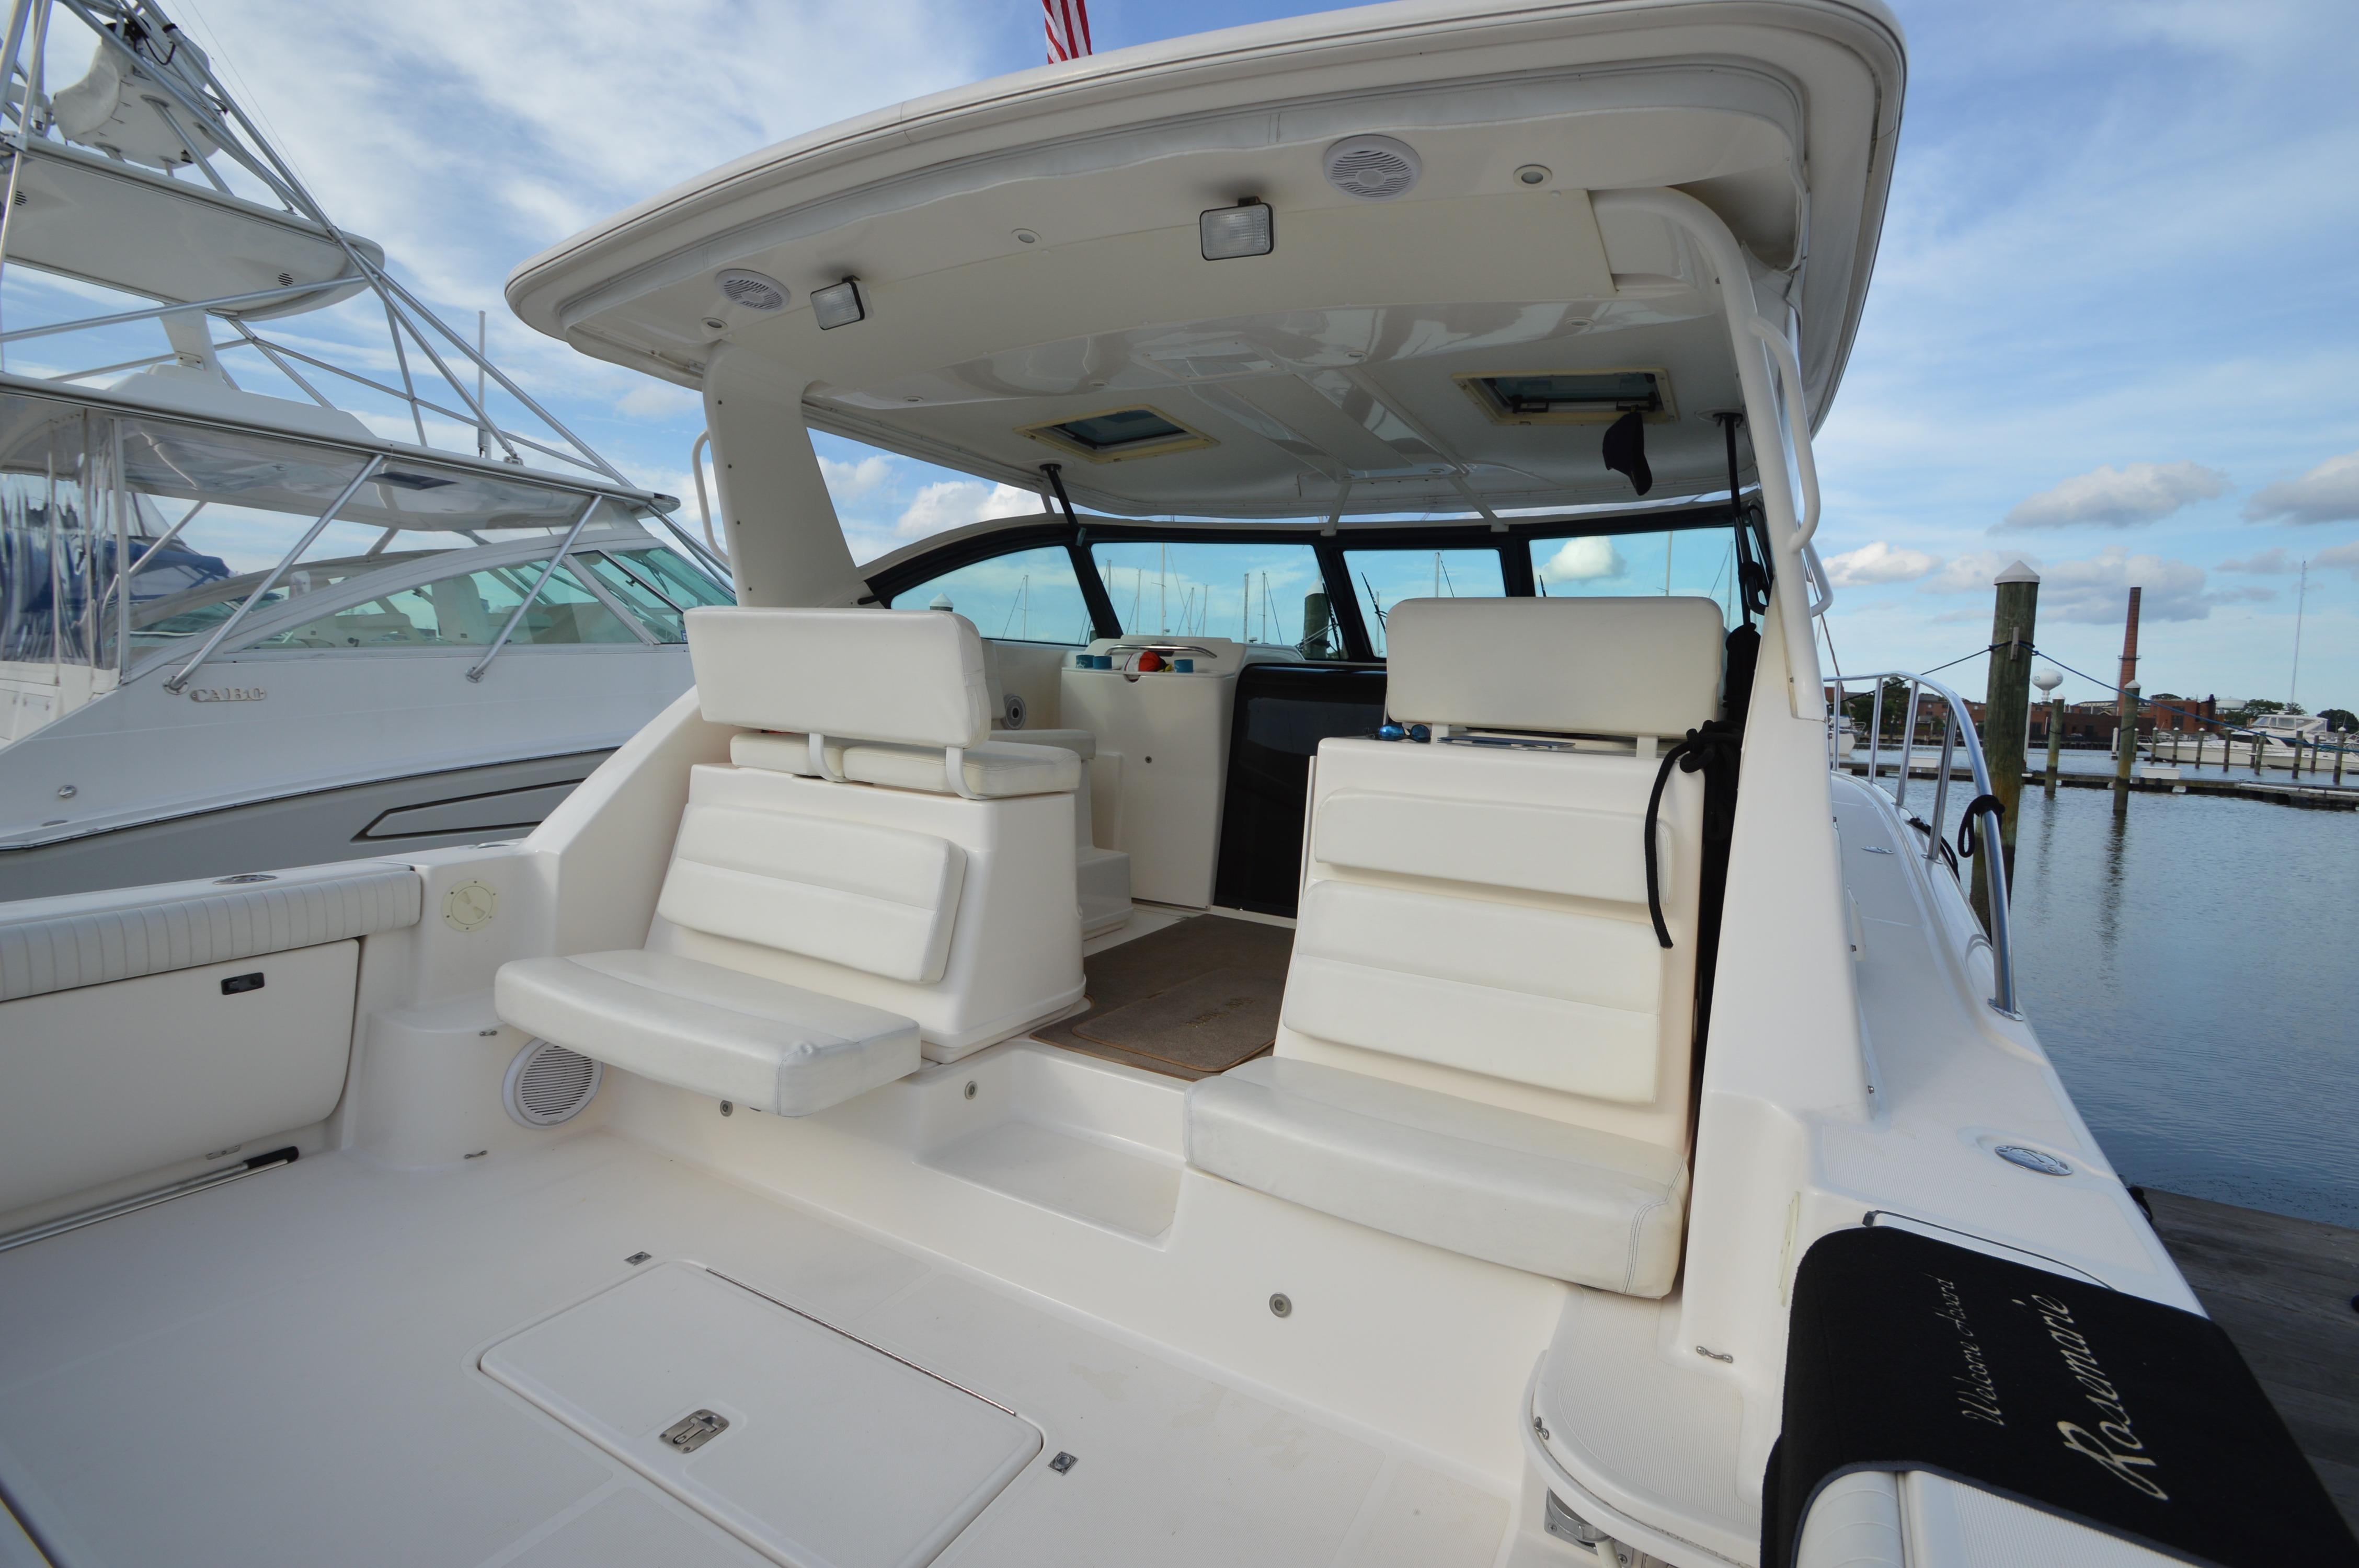 ... For Sale in Our Docks Hampton, Virginia, US | Denison Yacht Sales